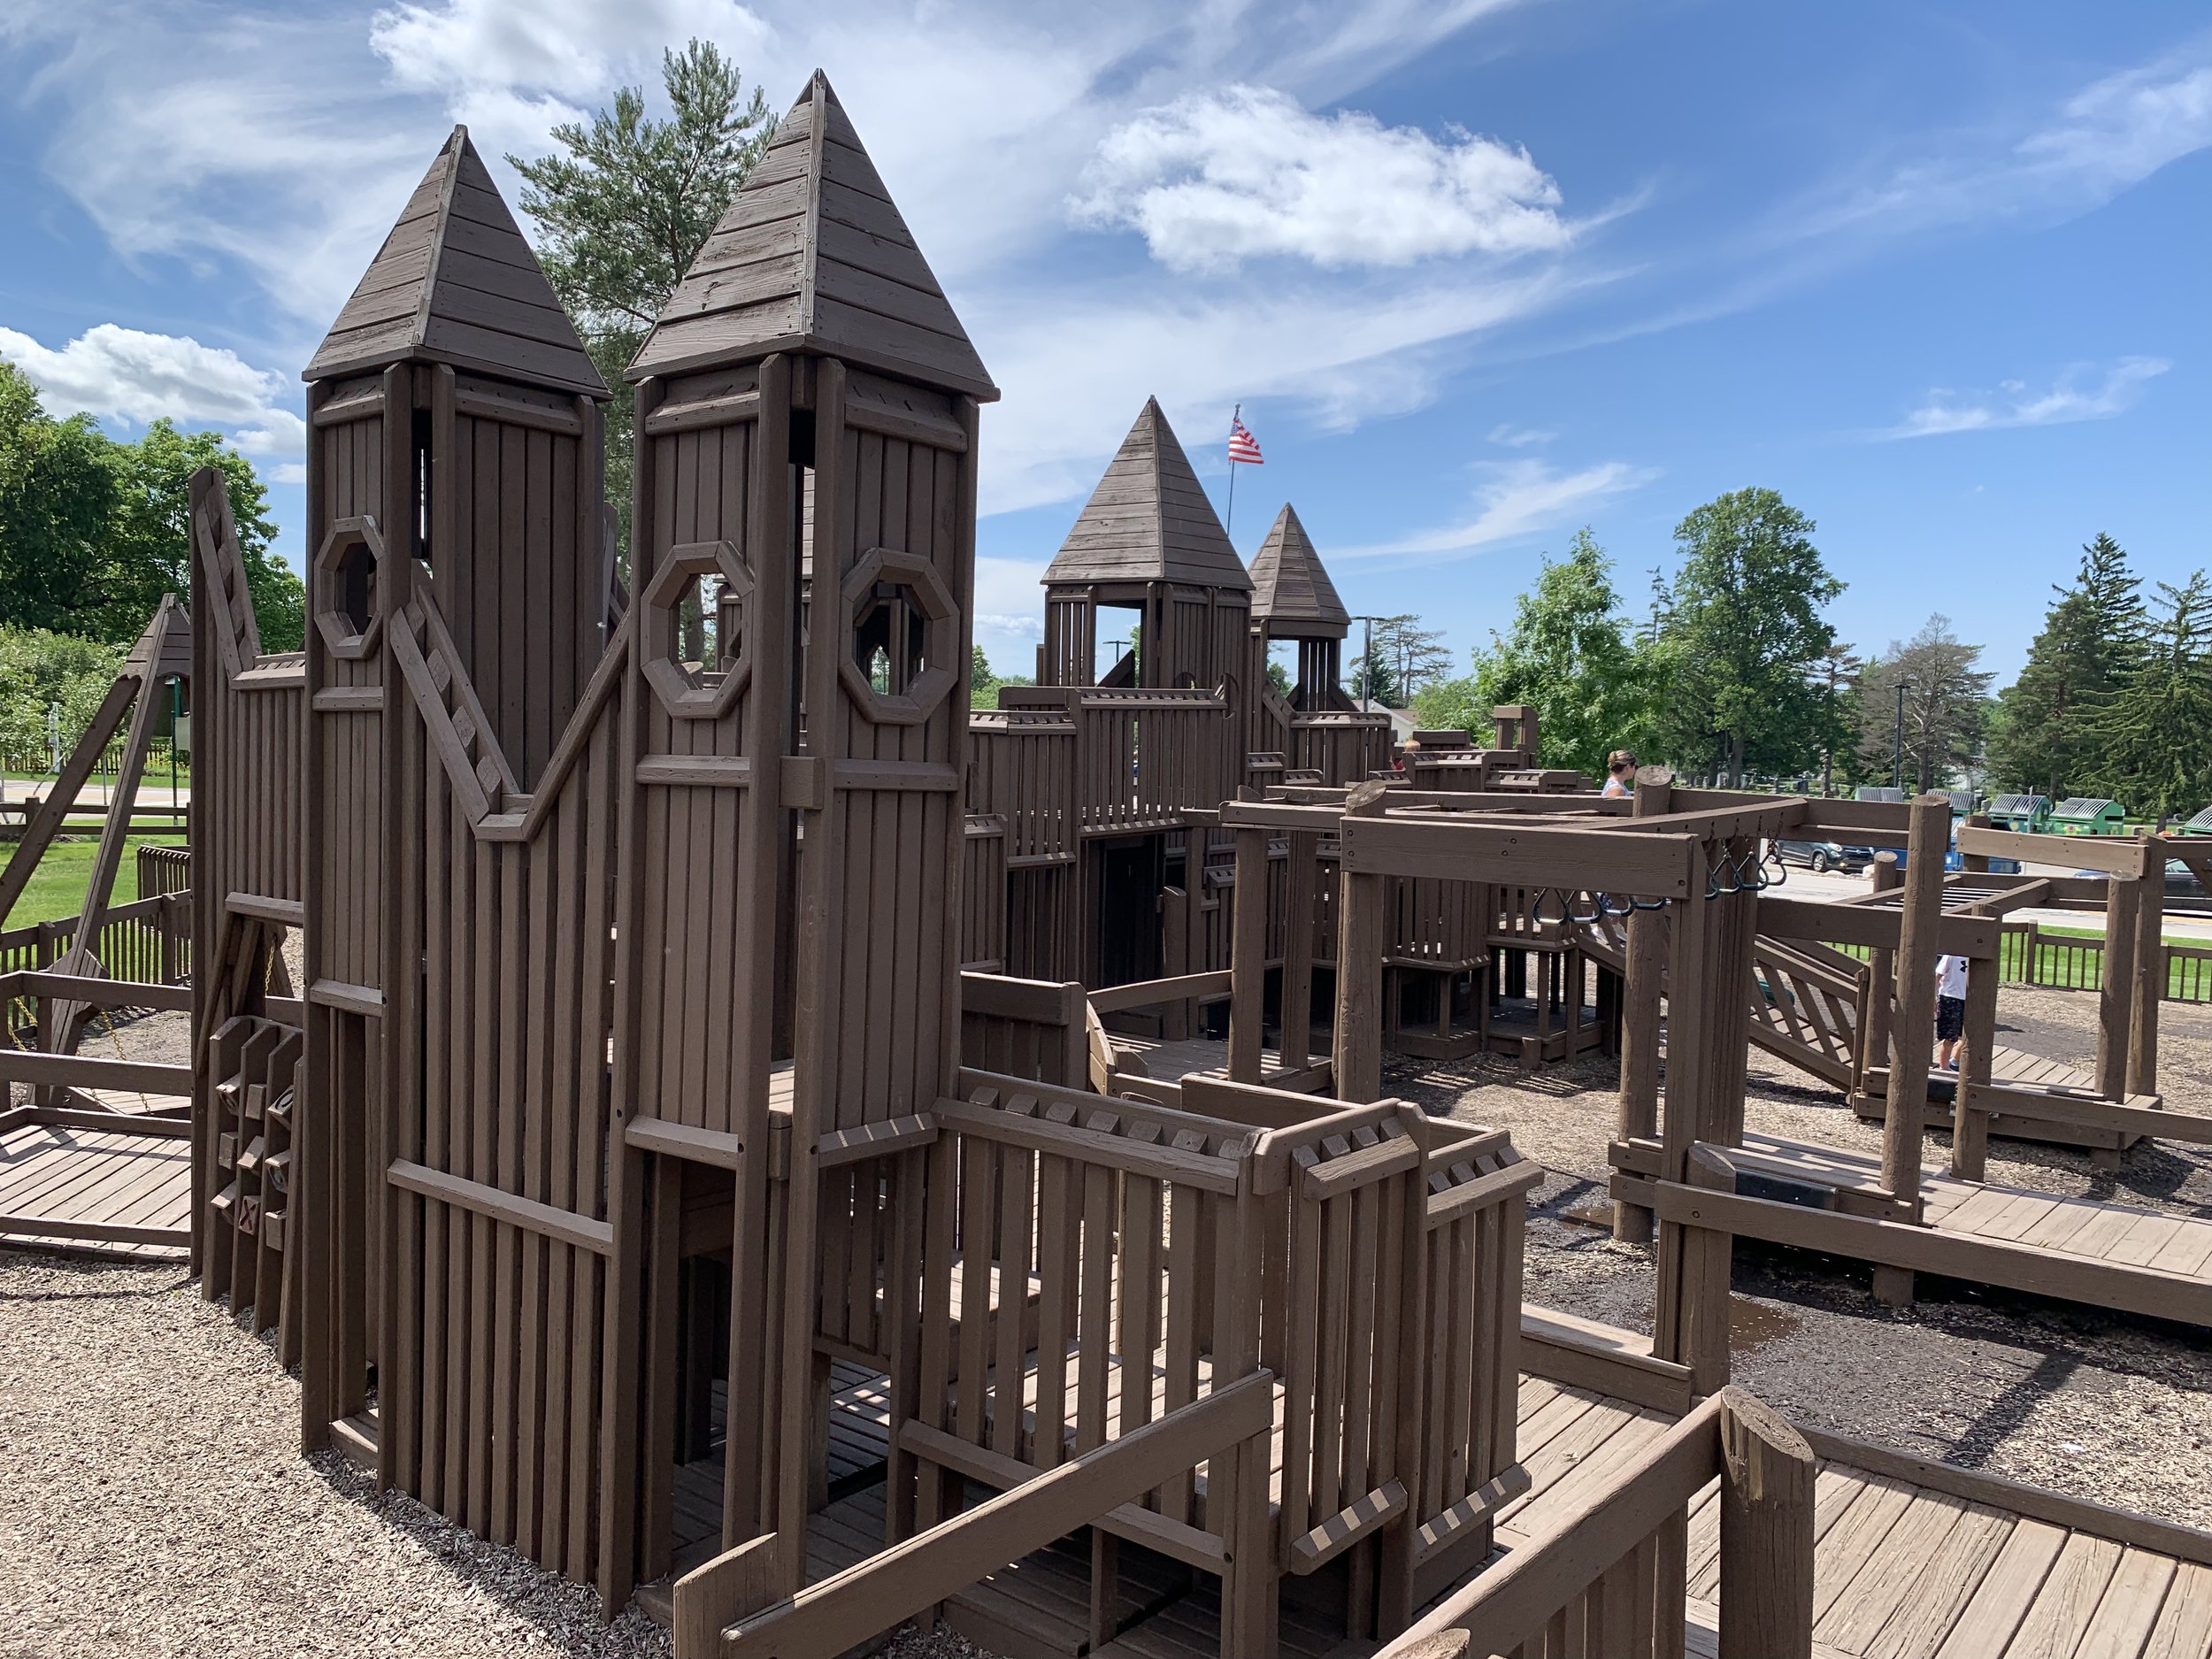 a park made of wood in the shape of a castle and northeast ohio park in strongsville